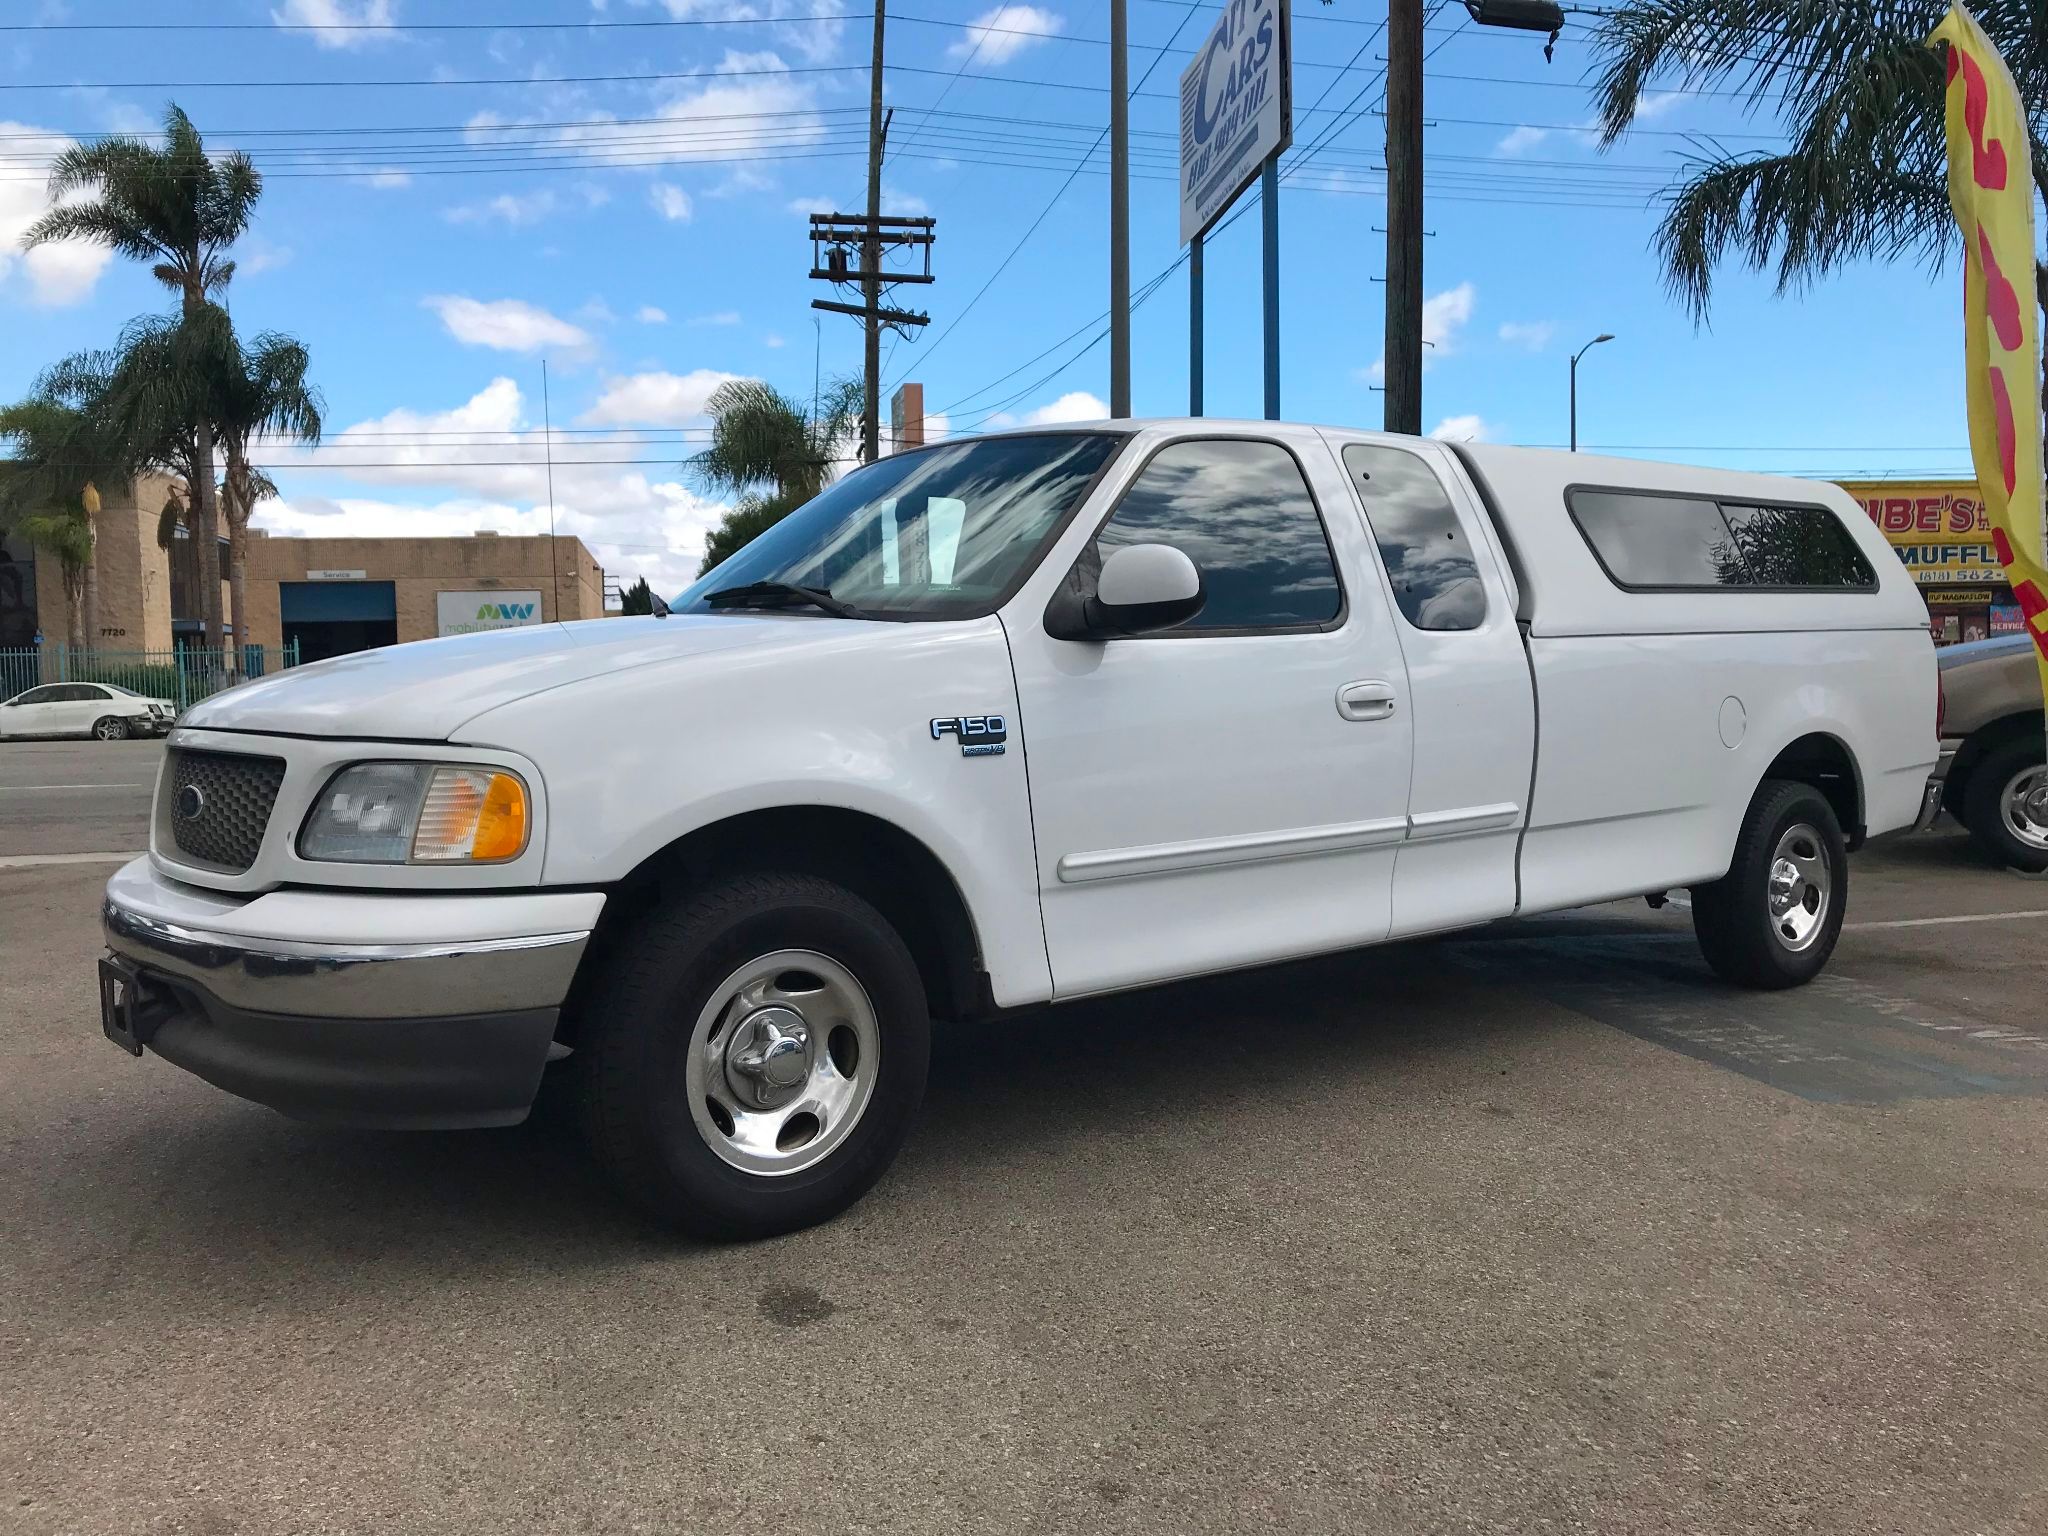 Used 2003 Ford F-150 XLT at City Cars Warehouse INC